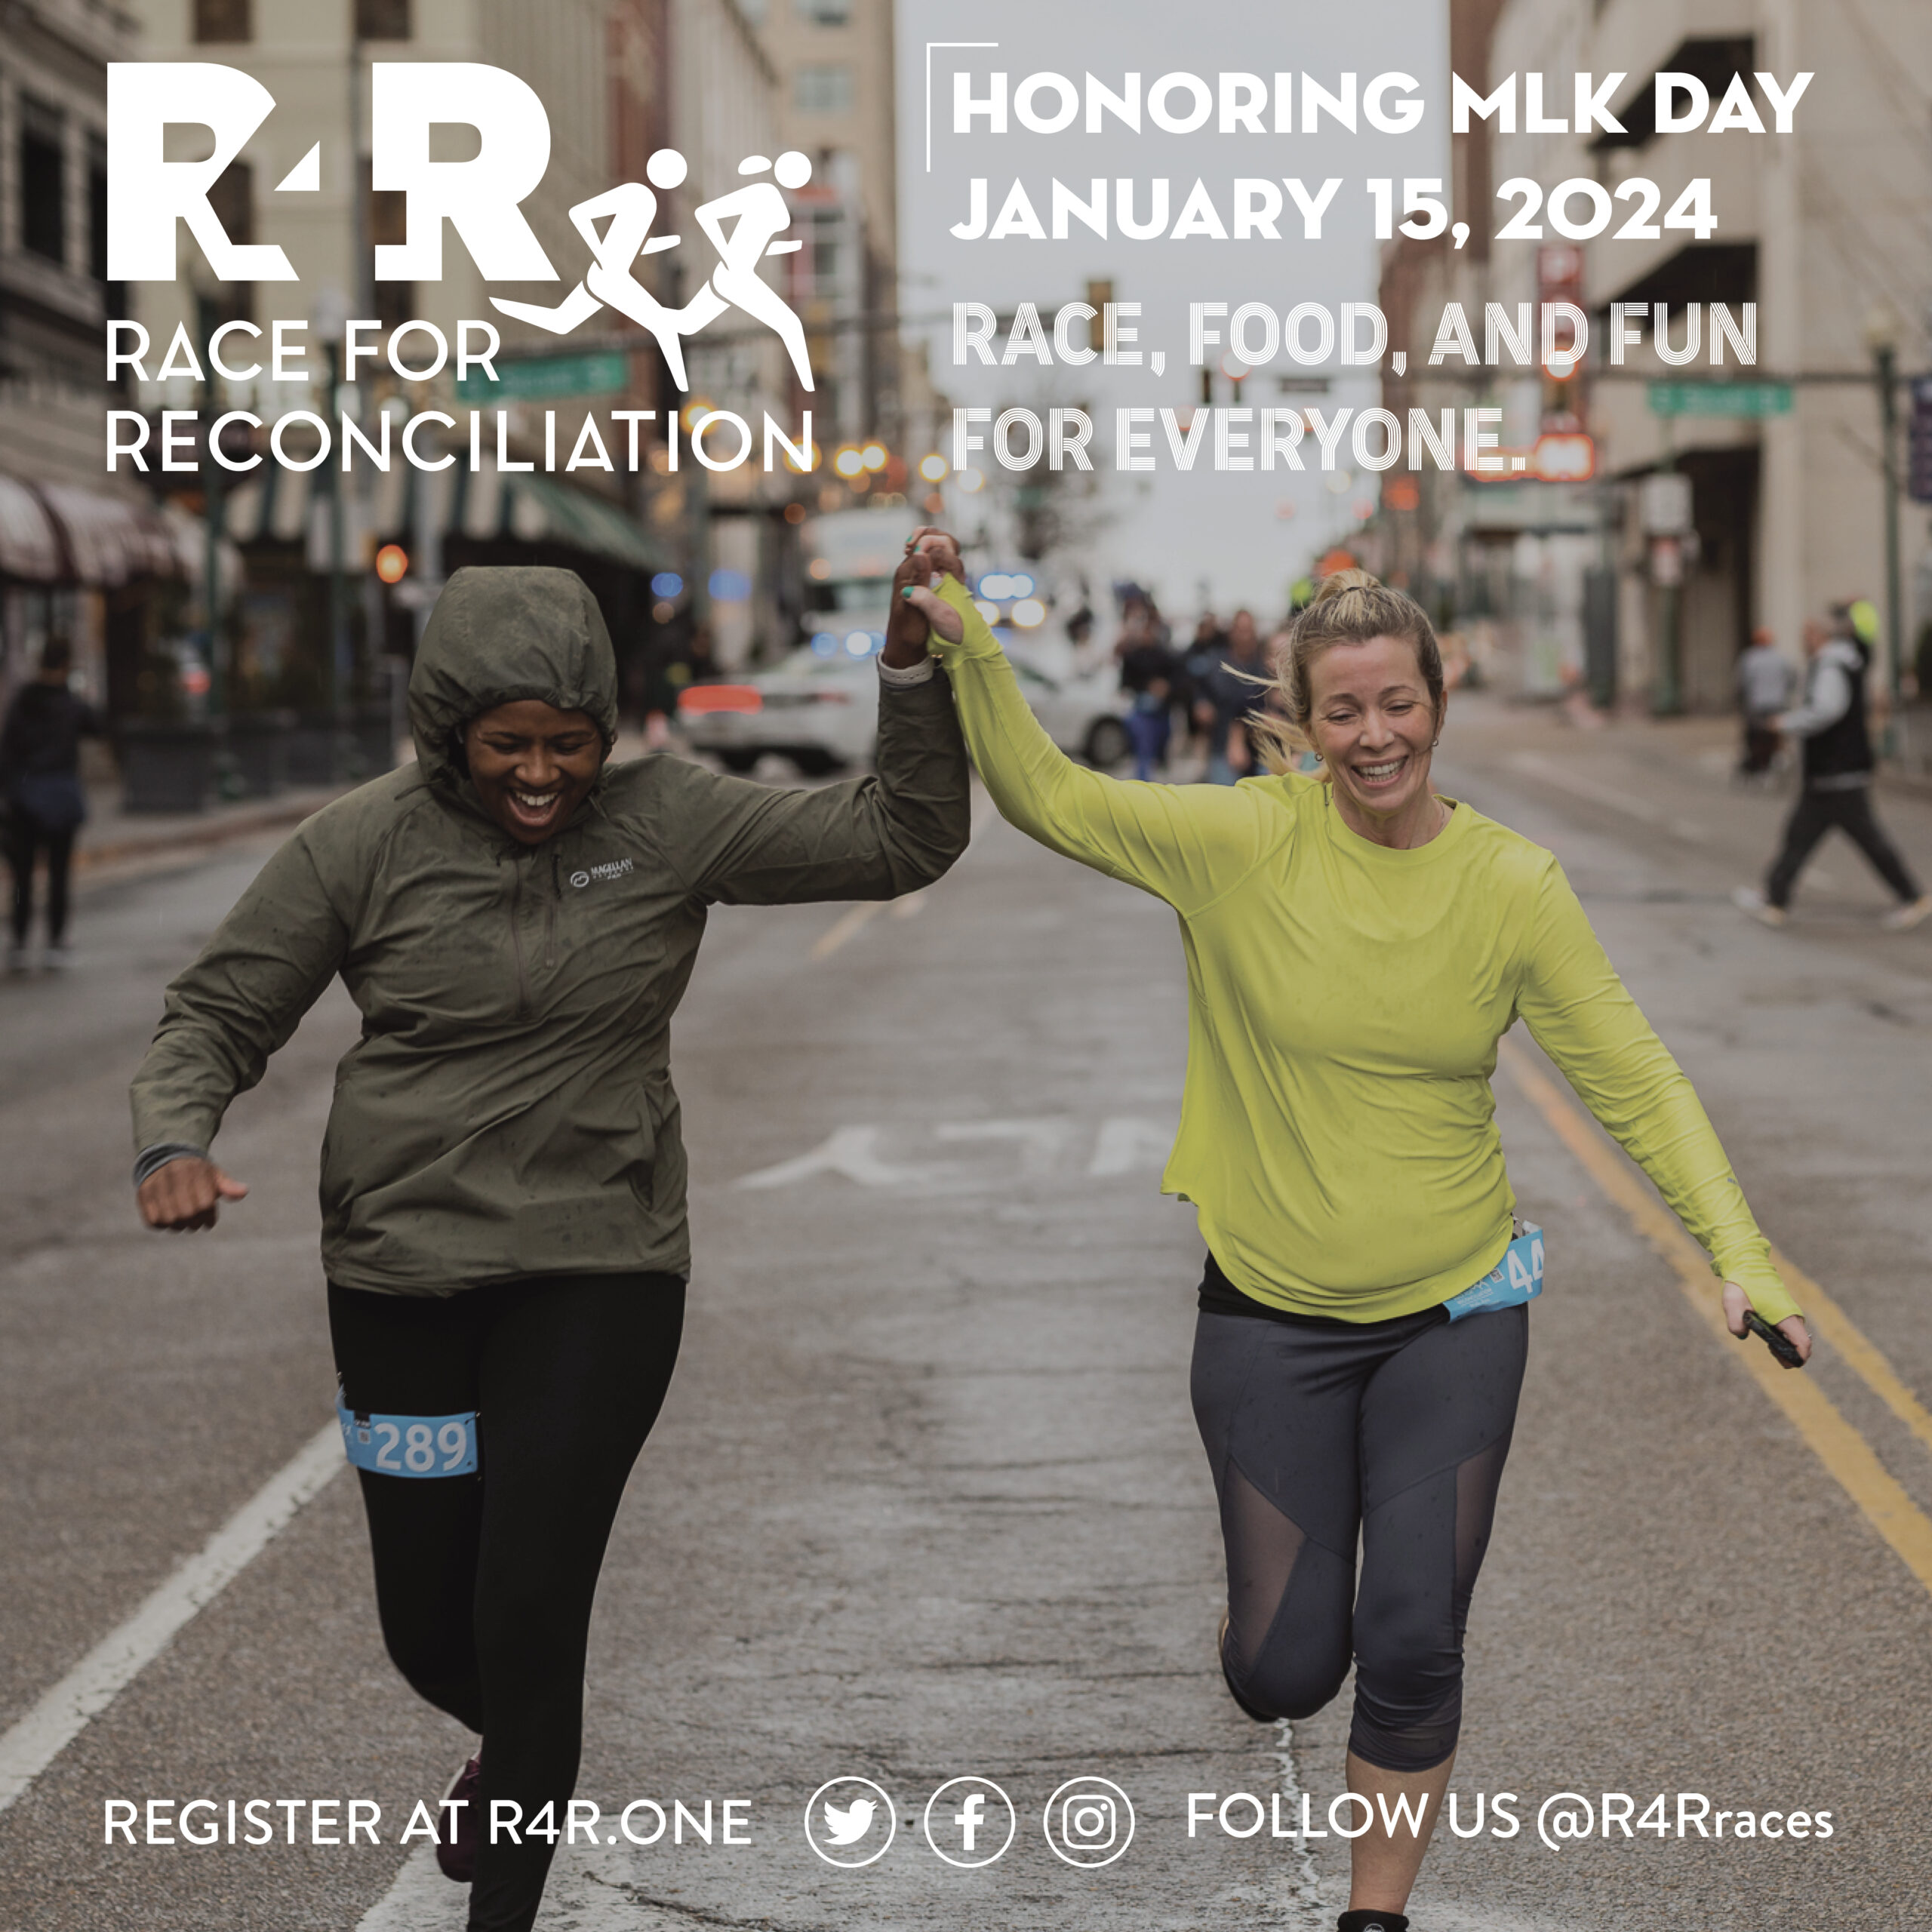 Join in the Race for Reconciliation!